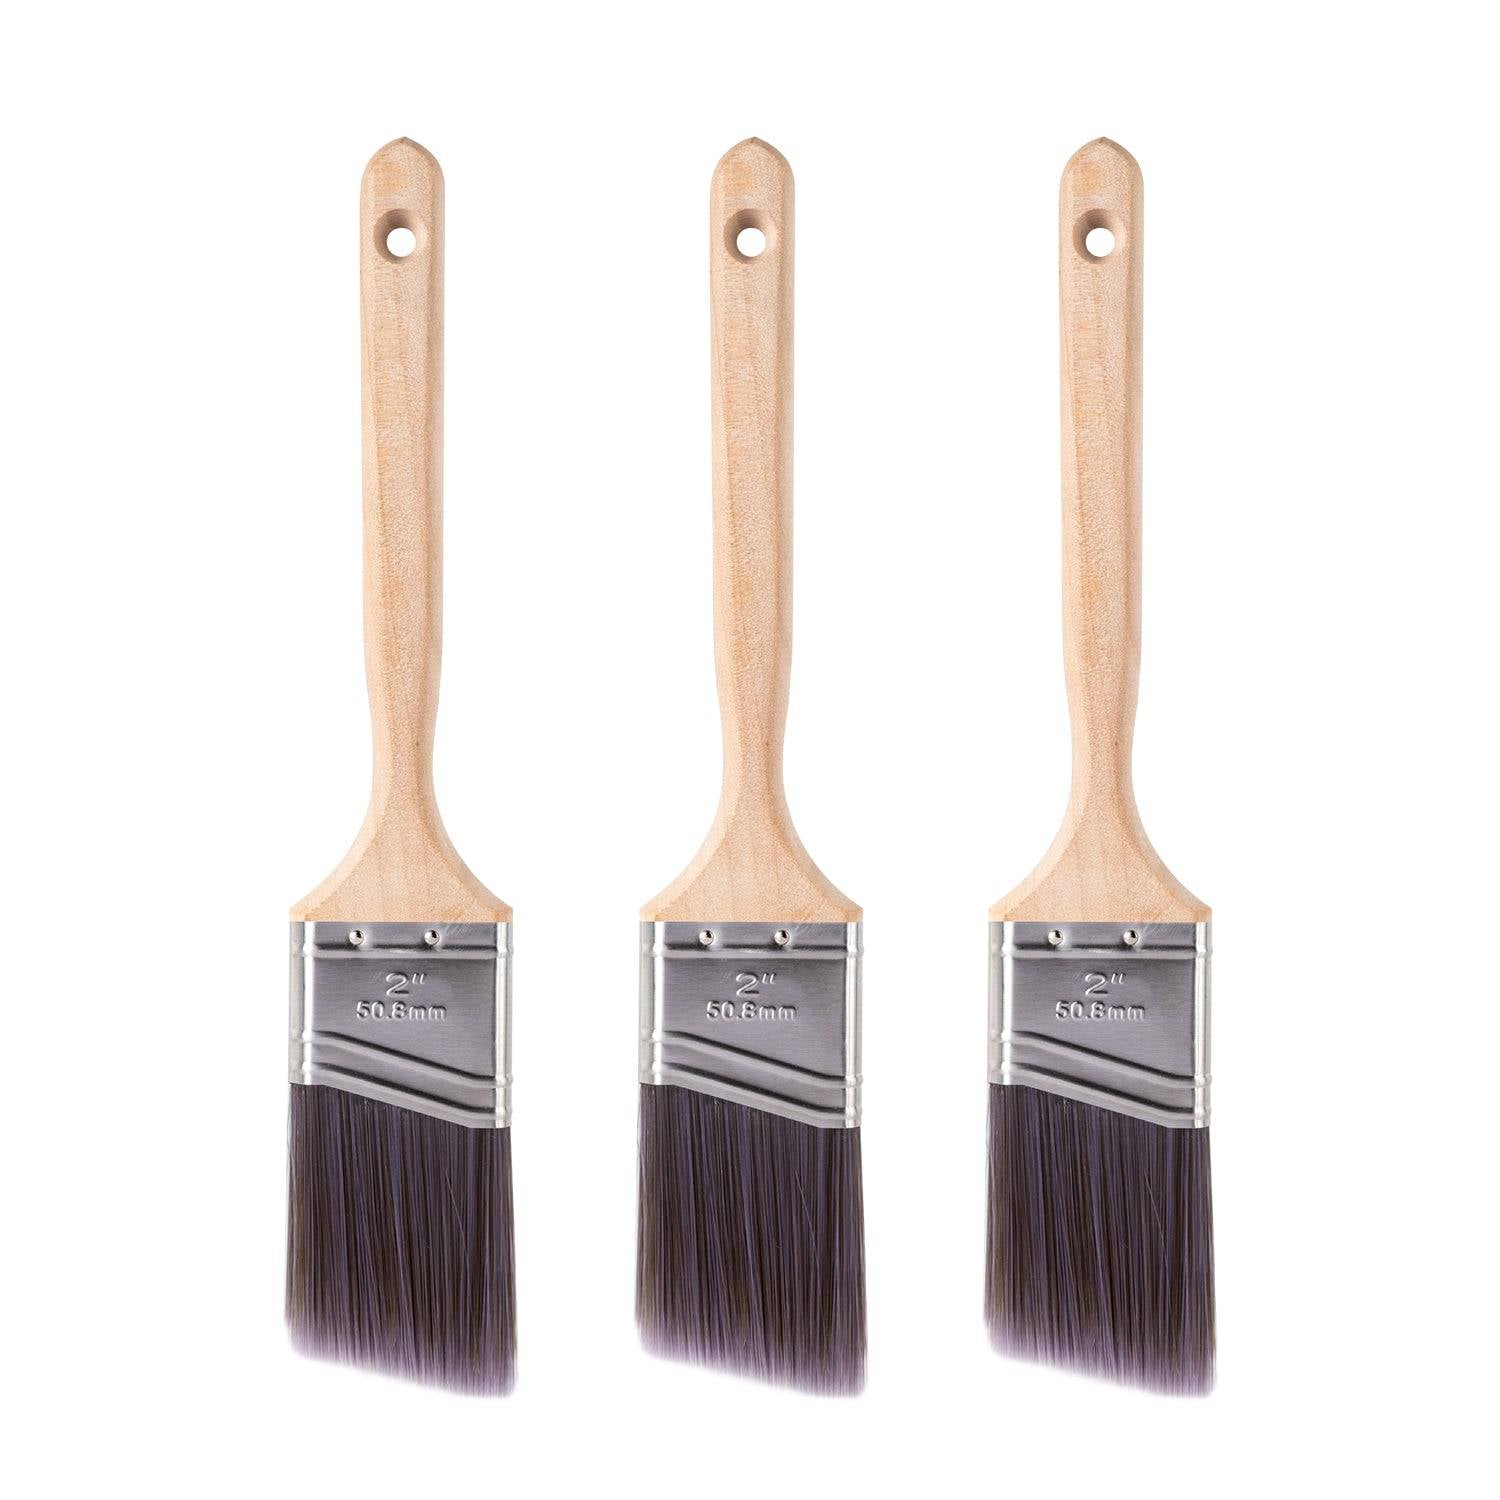 2 in Angle Sash Brush, Multiple Choice, for Cabinet Decks Fences Interior Exterior